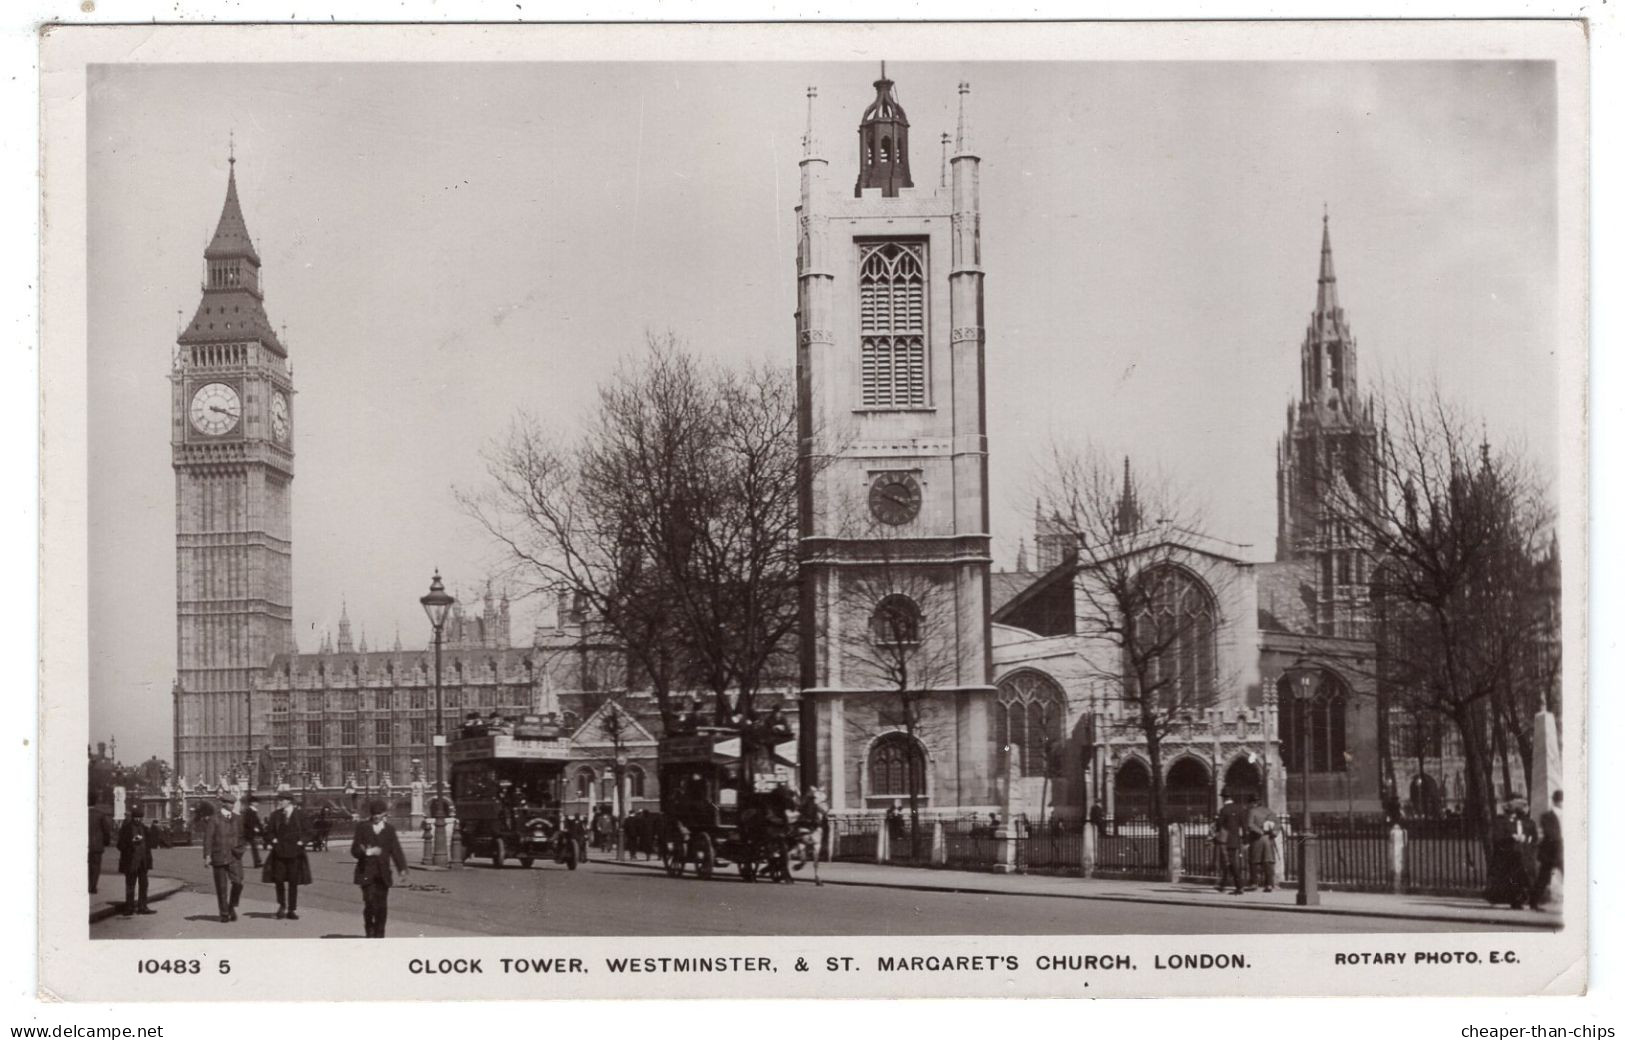 LONDON - Clock Tower & St. Margaret's Westminster - Rotary Photo 10483 5 - Westminster Abbey